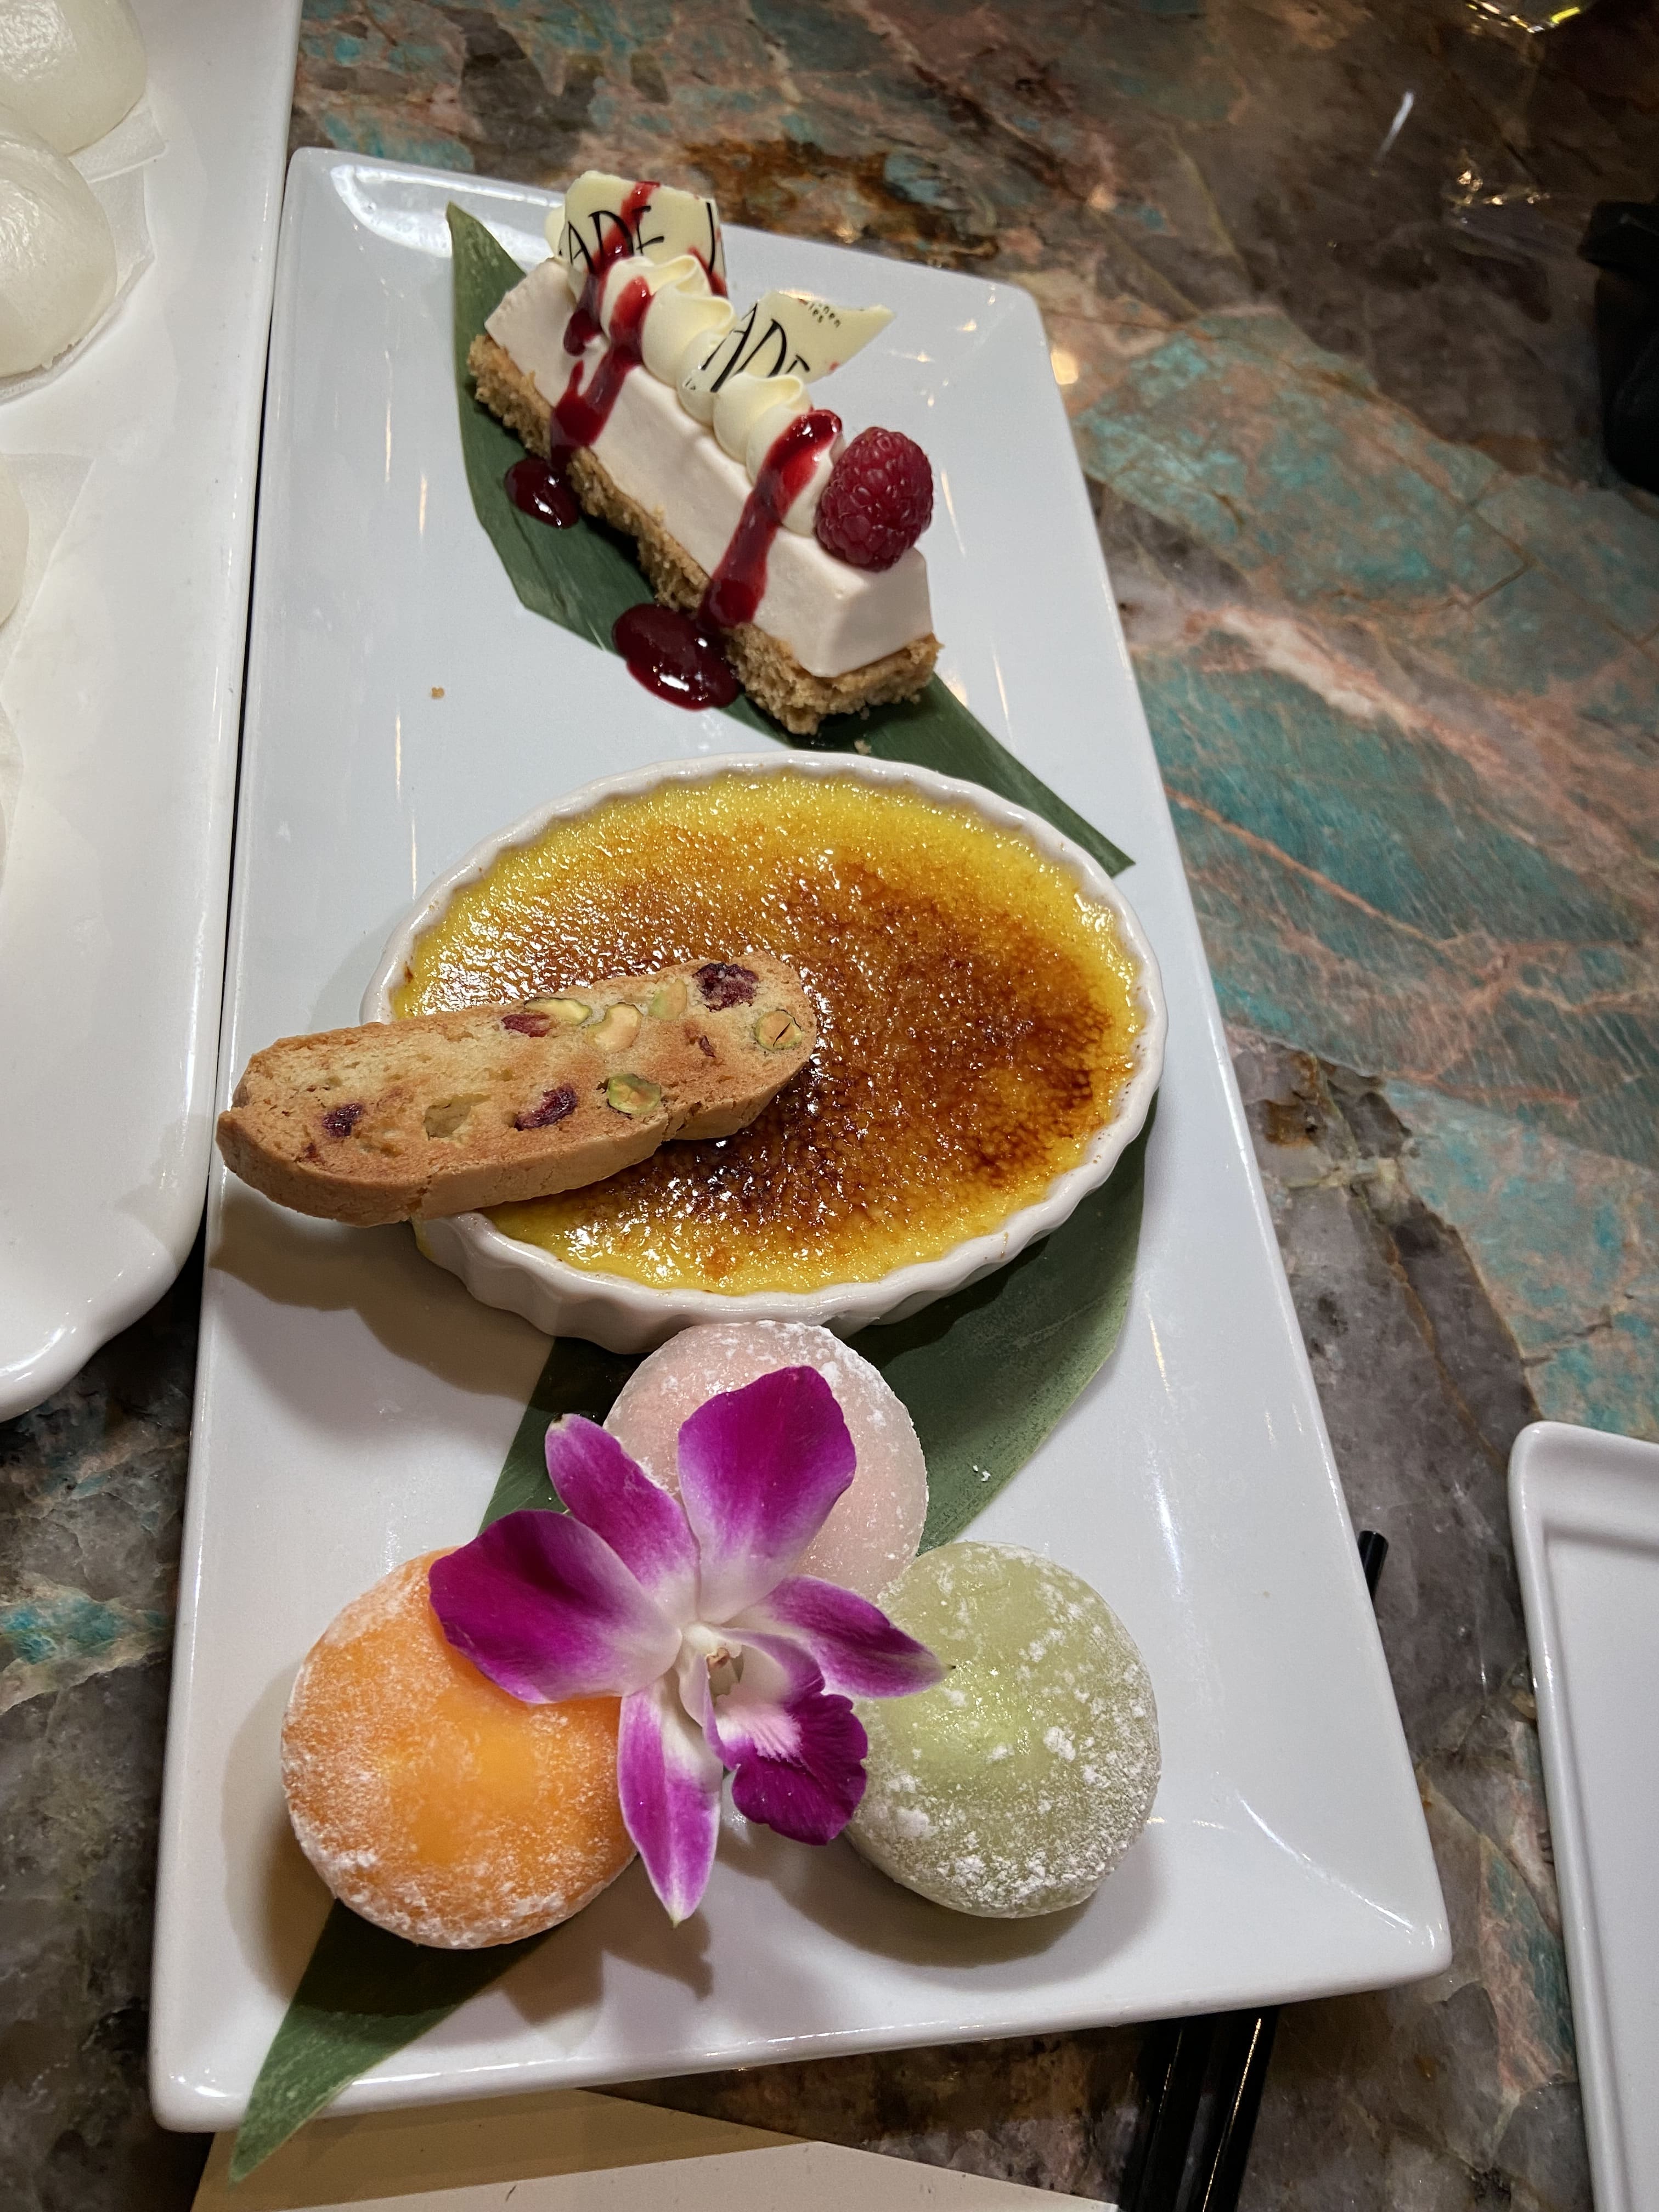 Jade trio dessert with matcha creme brulee, red bean cheesecake and mochi